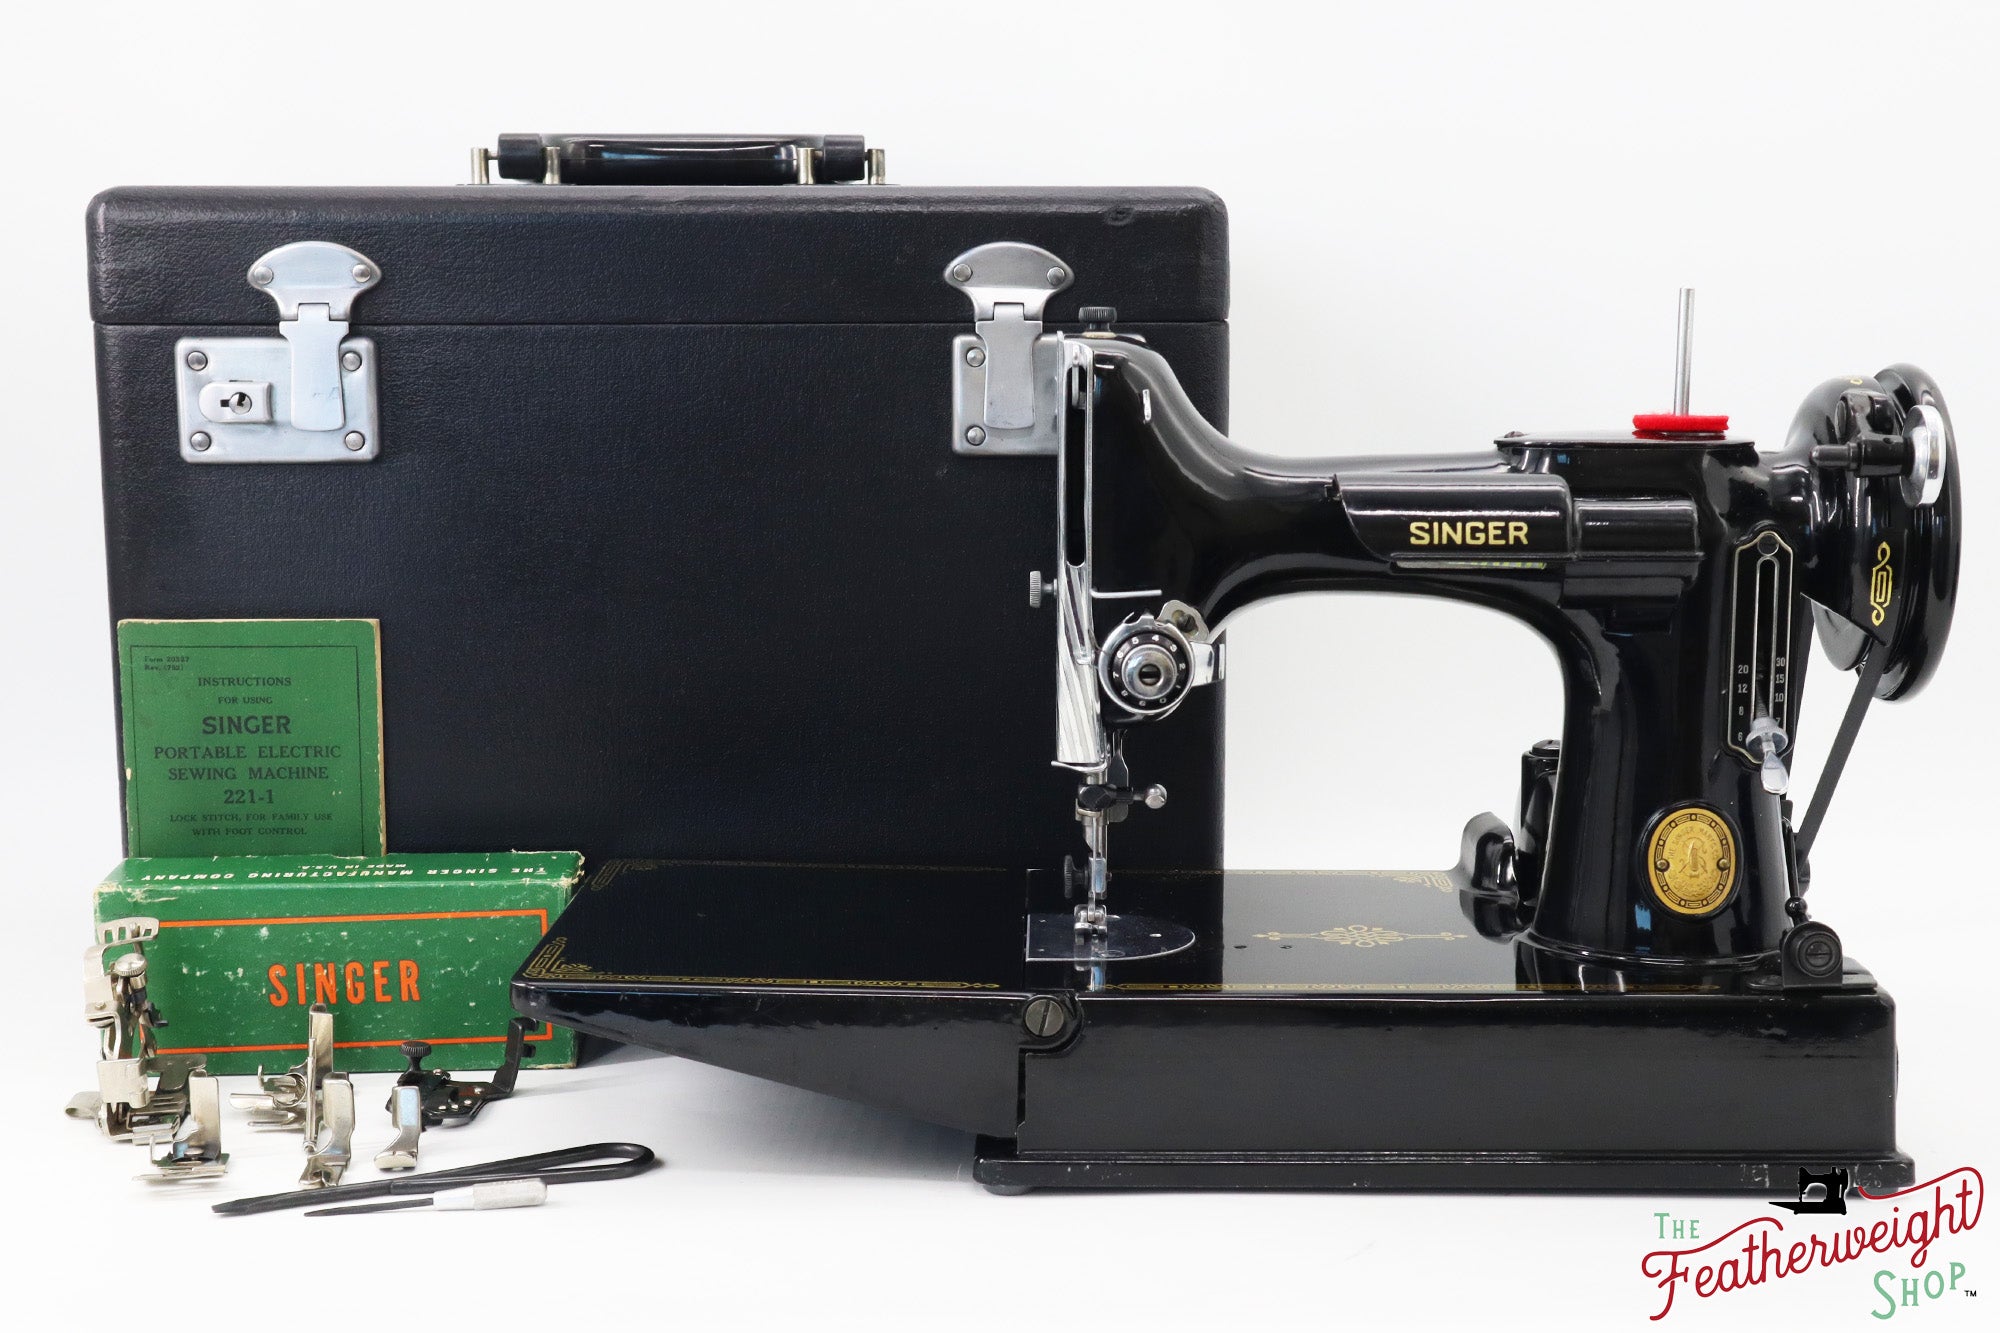 SINGER Stylist Electric Sewing Machine at Tractor Supply Co.